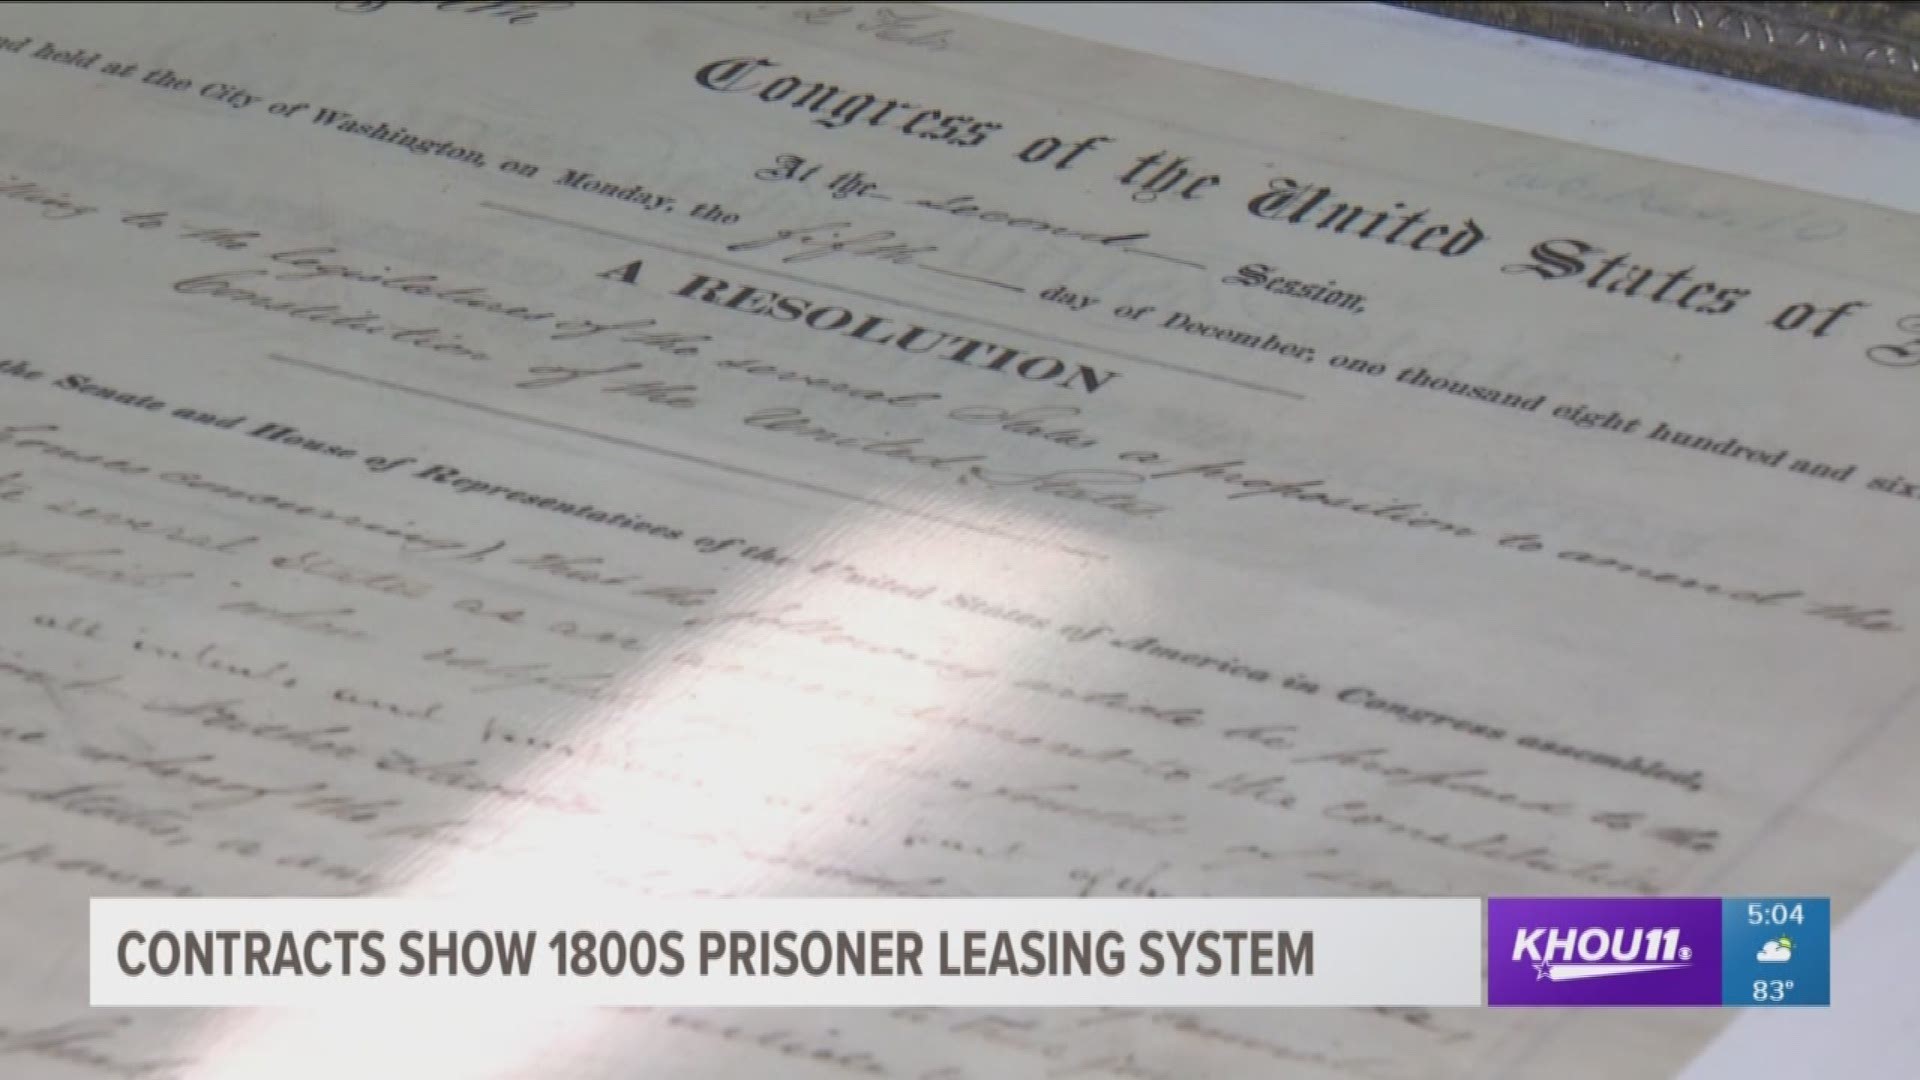 The remains opened a window into a dark period of state history concerning the convict leasing system in place at the turn of the century.